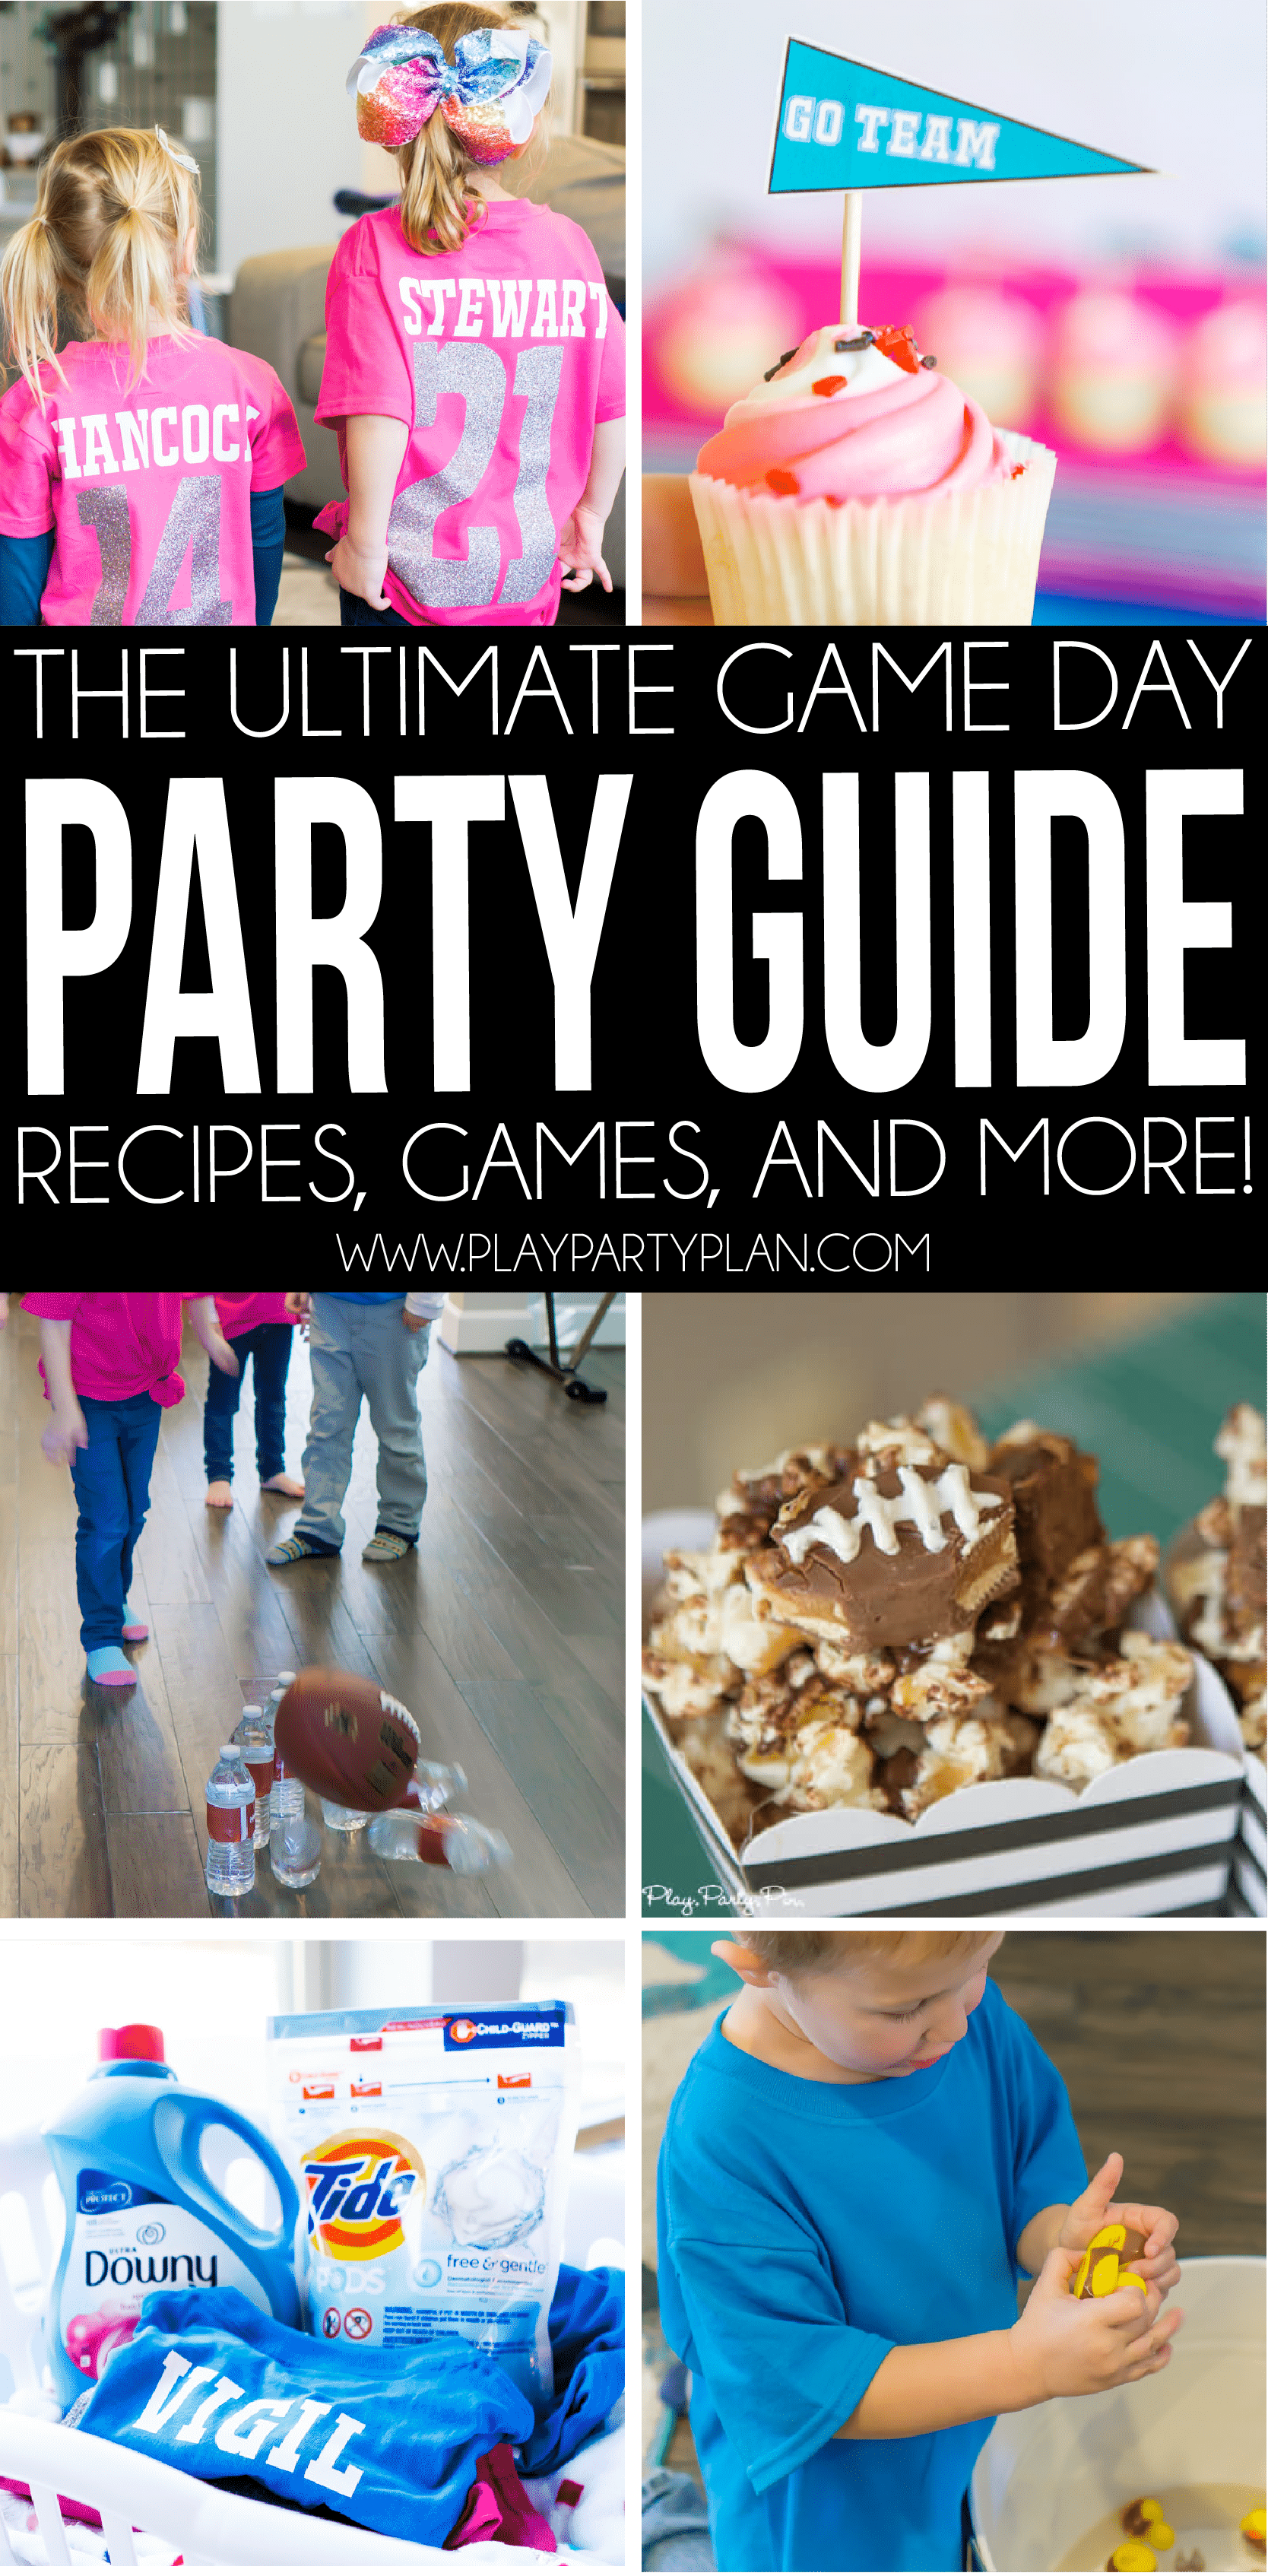 Football Party Games for Kids and Other Touchdown Worthy Party Ideas